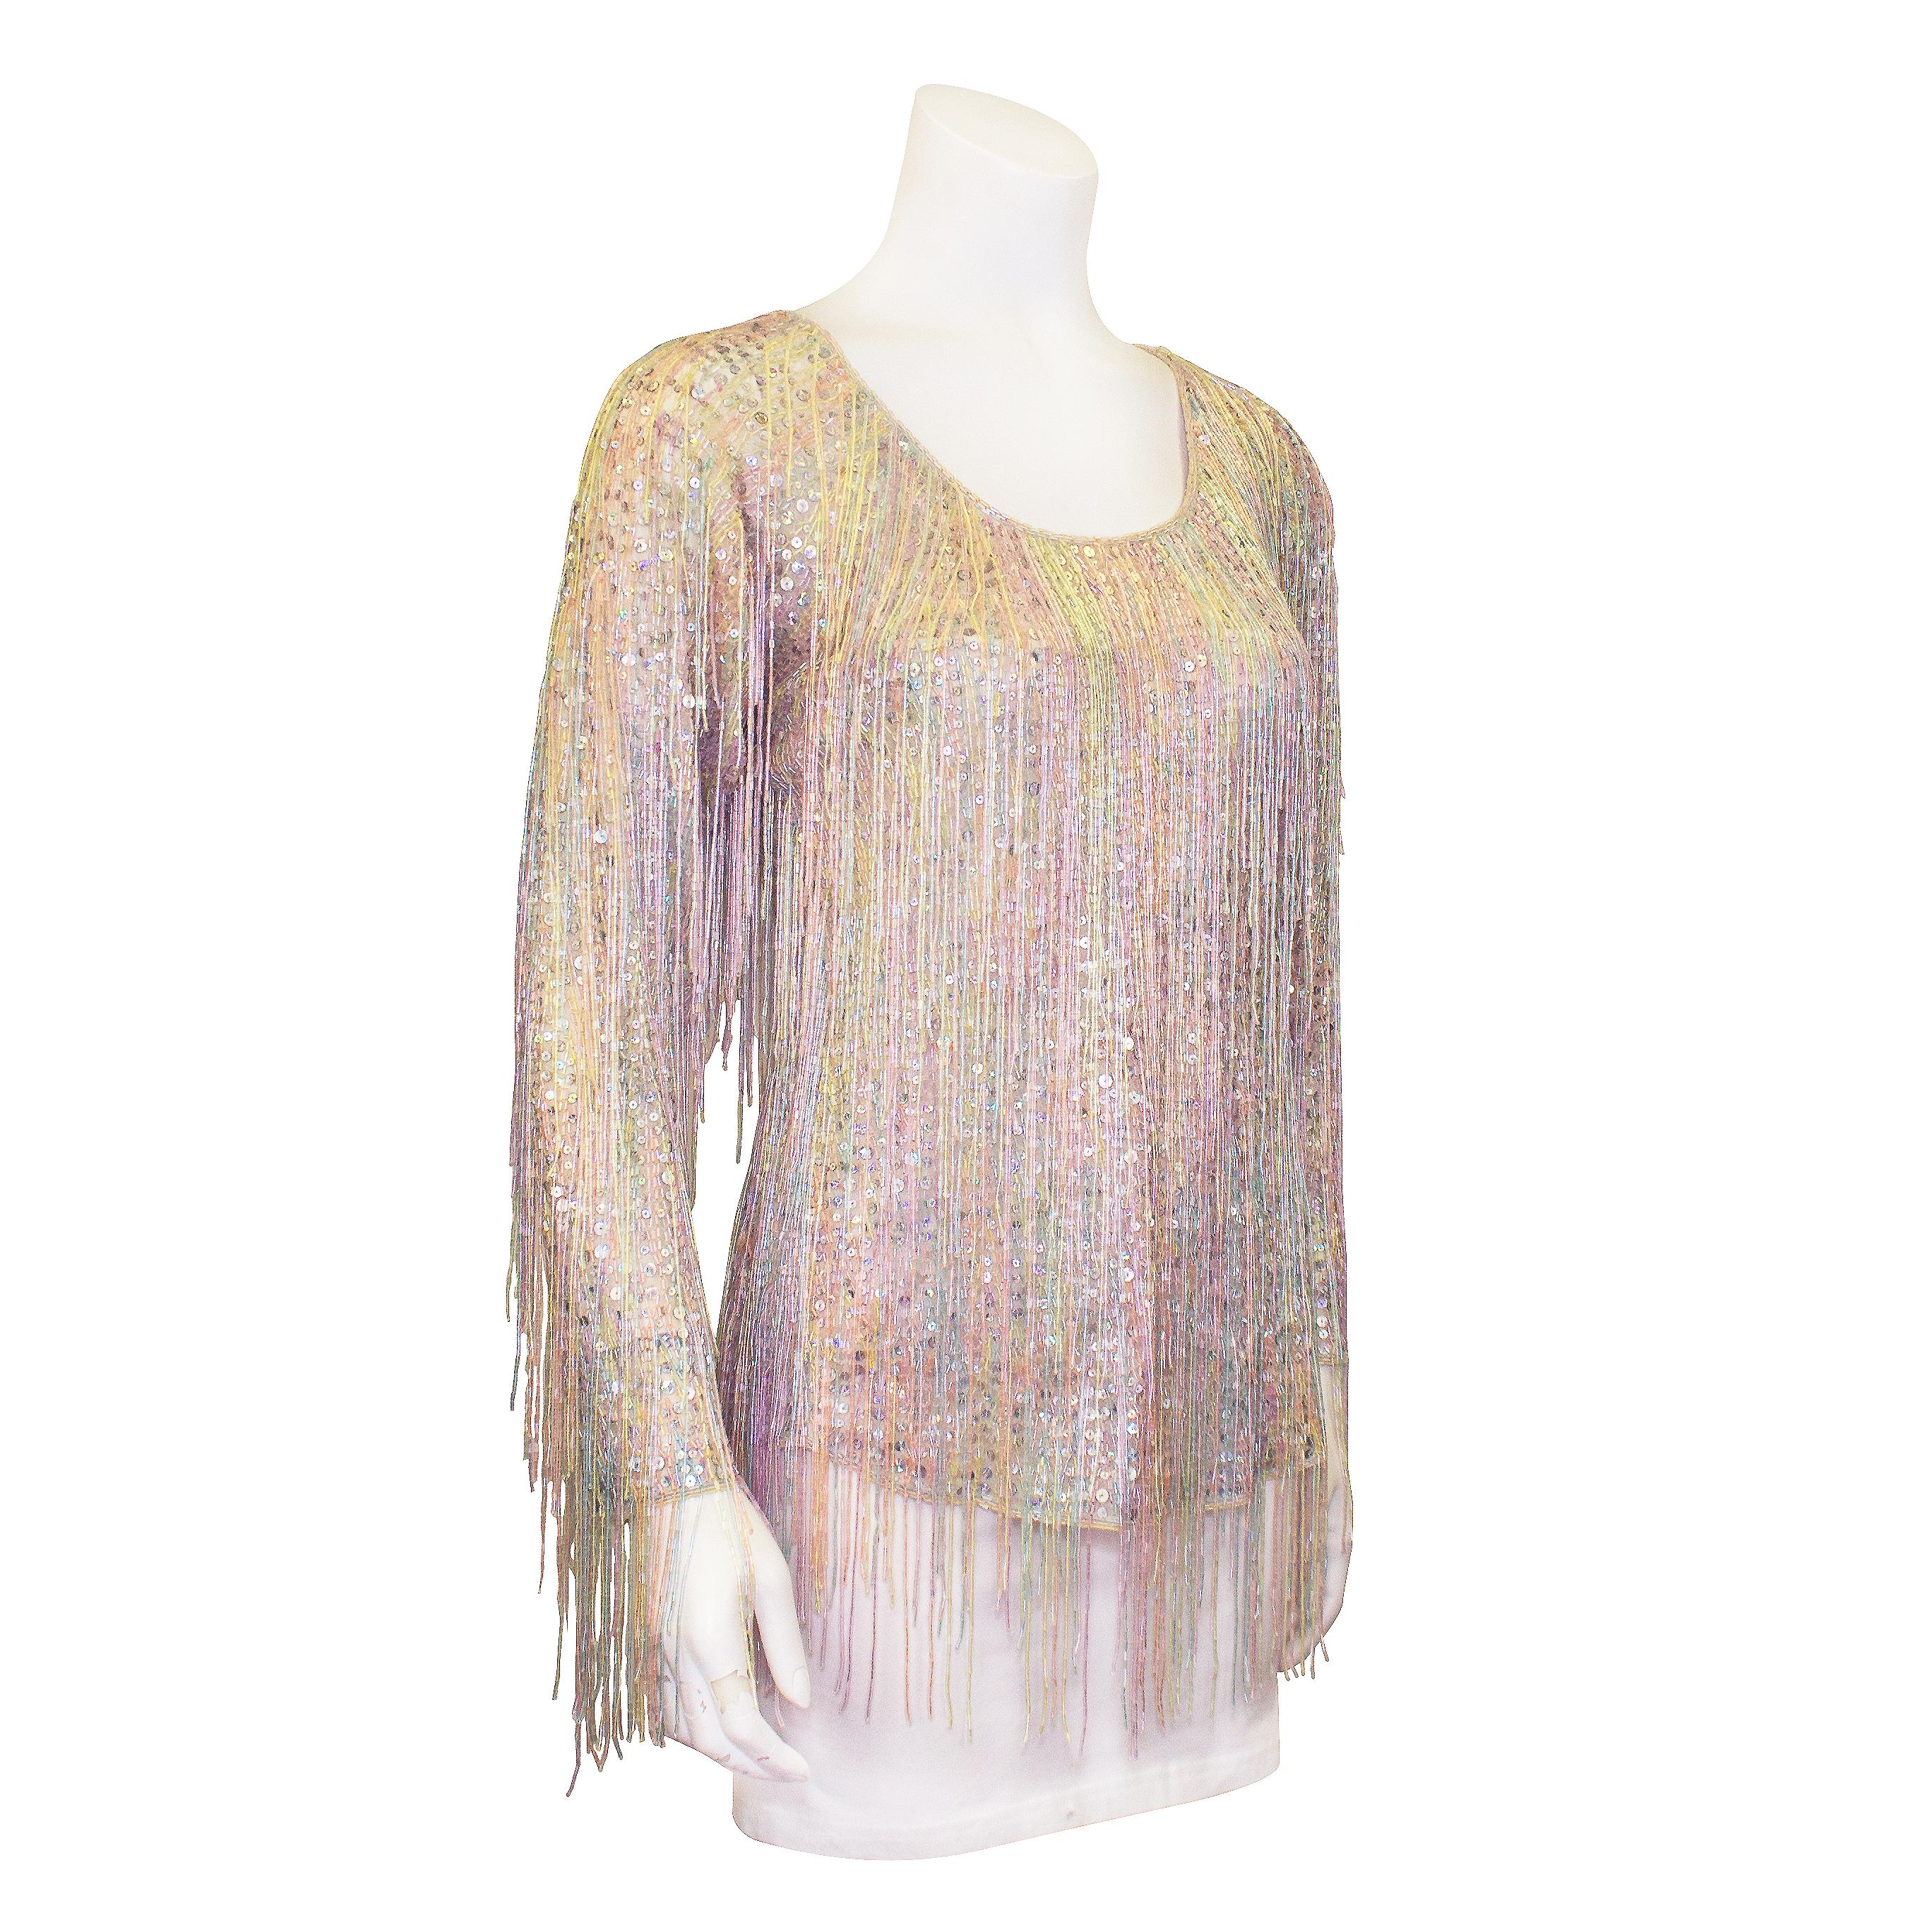 Hello Studio 54! This 1970s Halston piece is a work of art and could not be more fabulous. Long sleeved with a scoop neck, this top is entirely hand embellished with small silver sequins and rows of small iridescent pastel tube beads. Pastel blue,